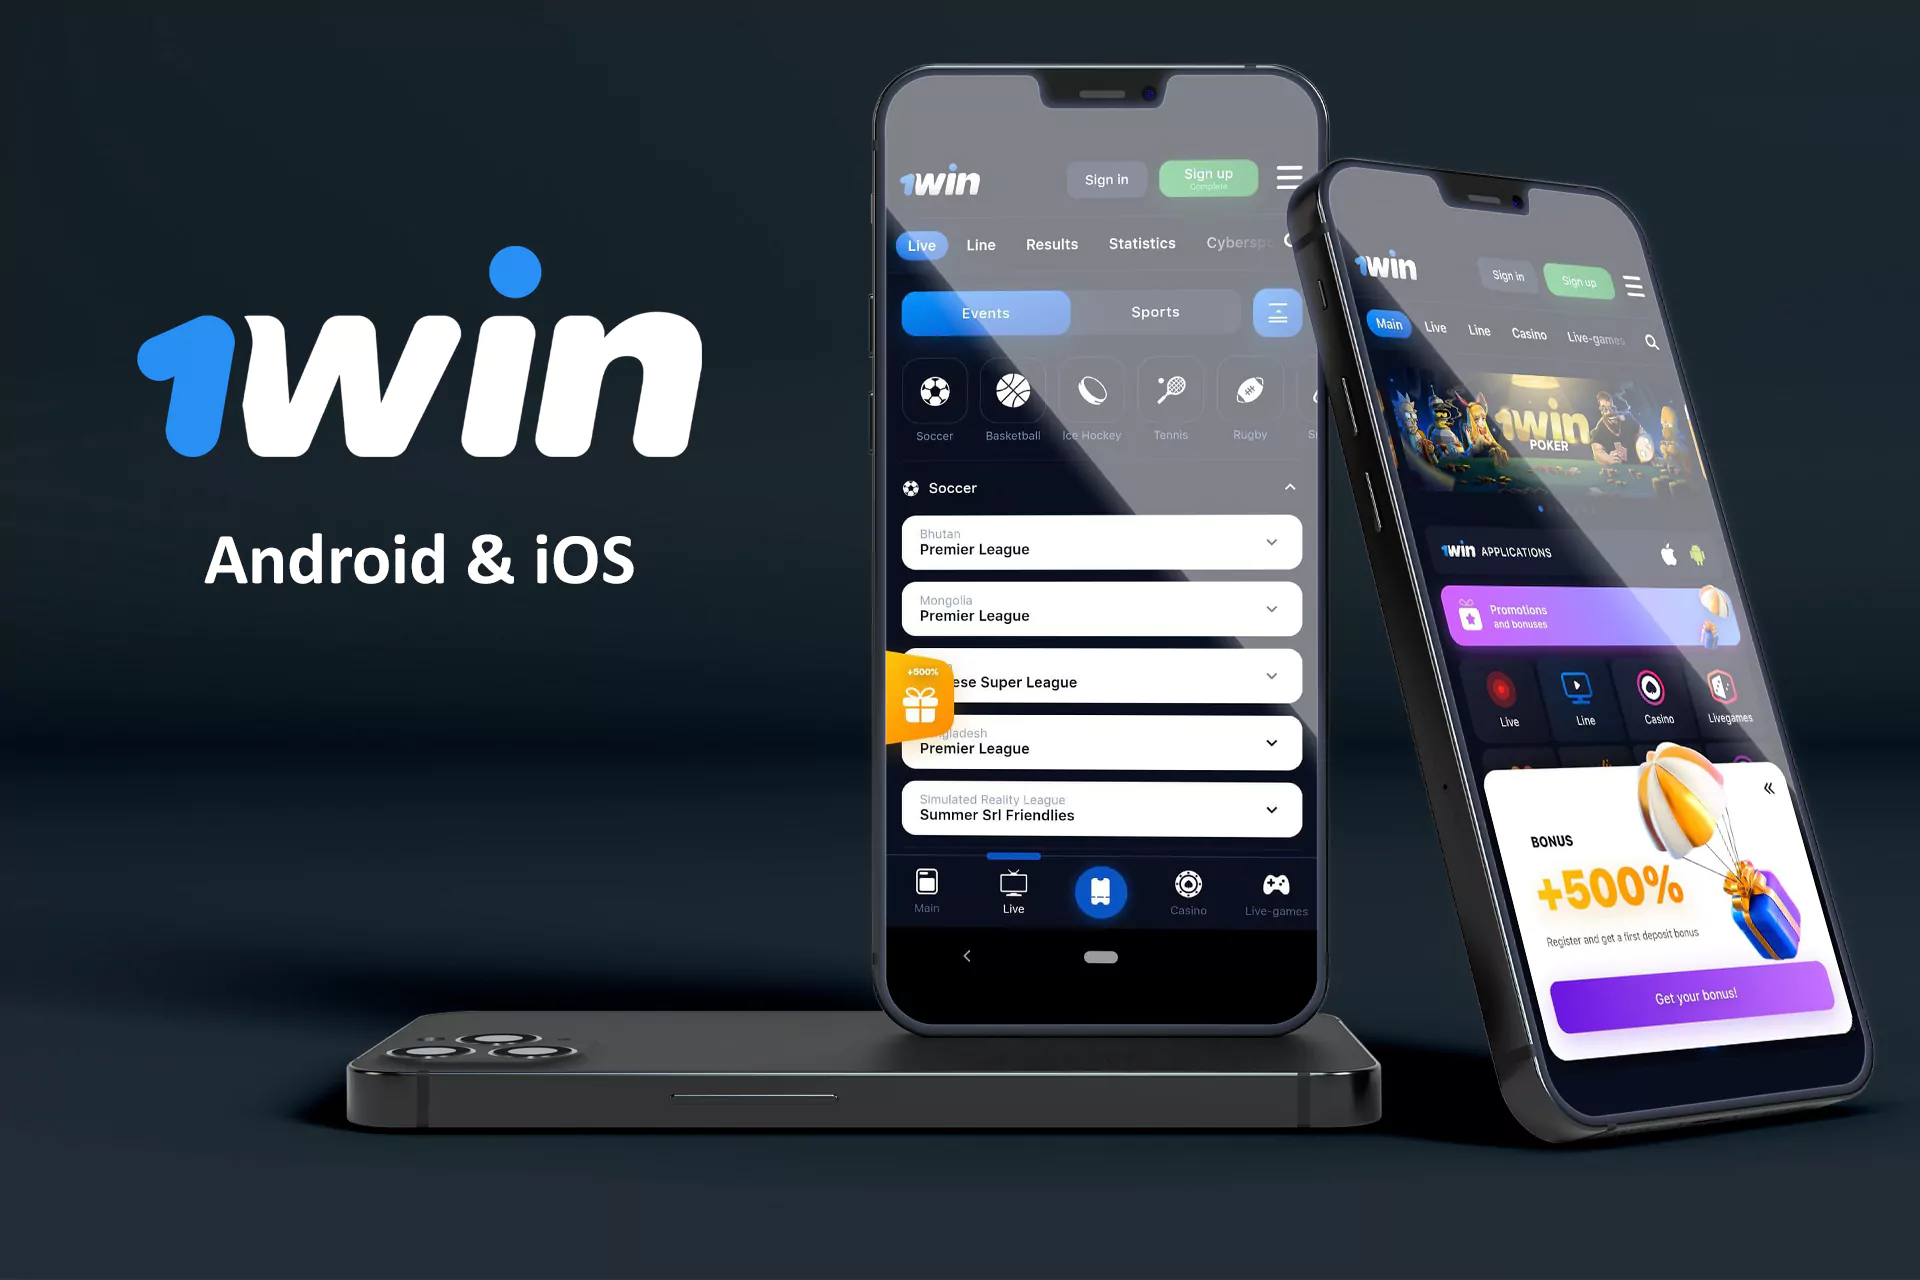 1Win also has mobile apps for Android and iOS cell phones for online cricket betting or for betting on any other sport.